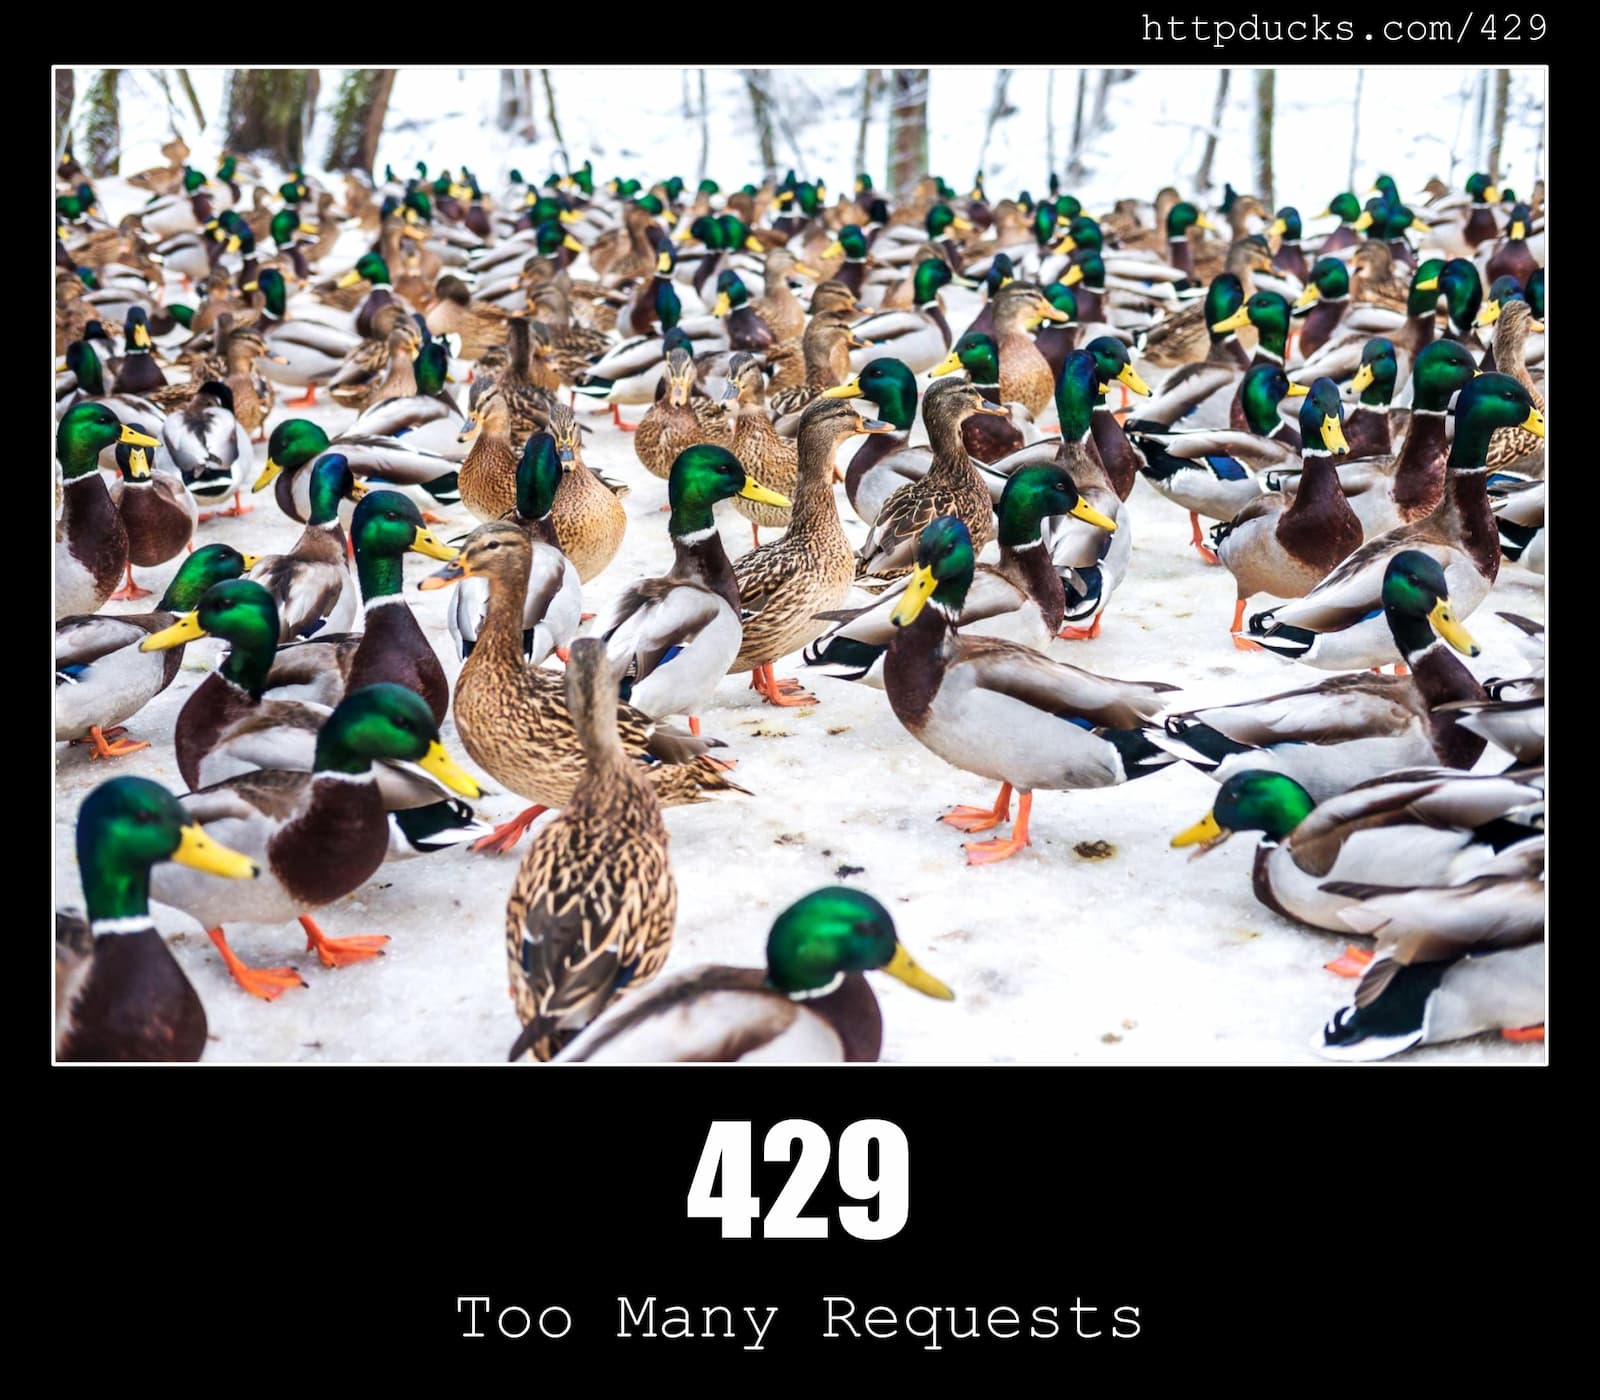 HTTP Status Code 429 Too Many Requests & Ducks